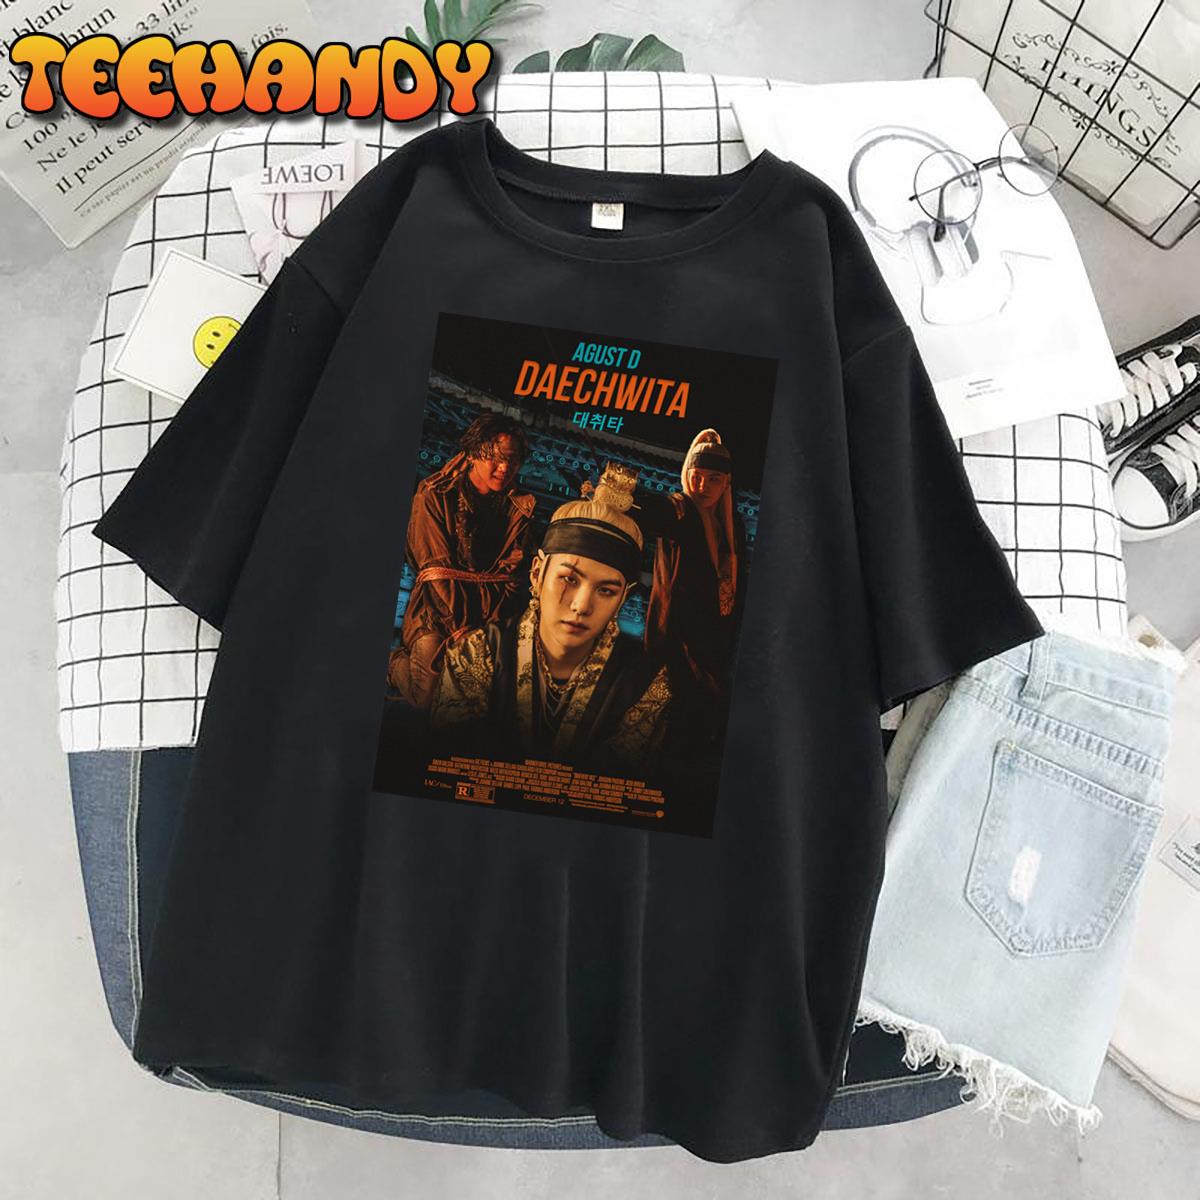 Agust D Daechwita Movie Poster 11 Gift For Fans Unisex T-Shirt